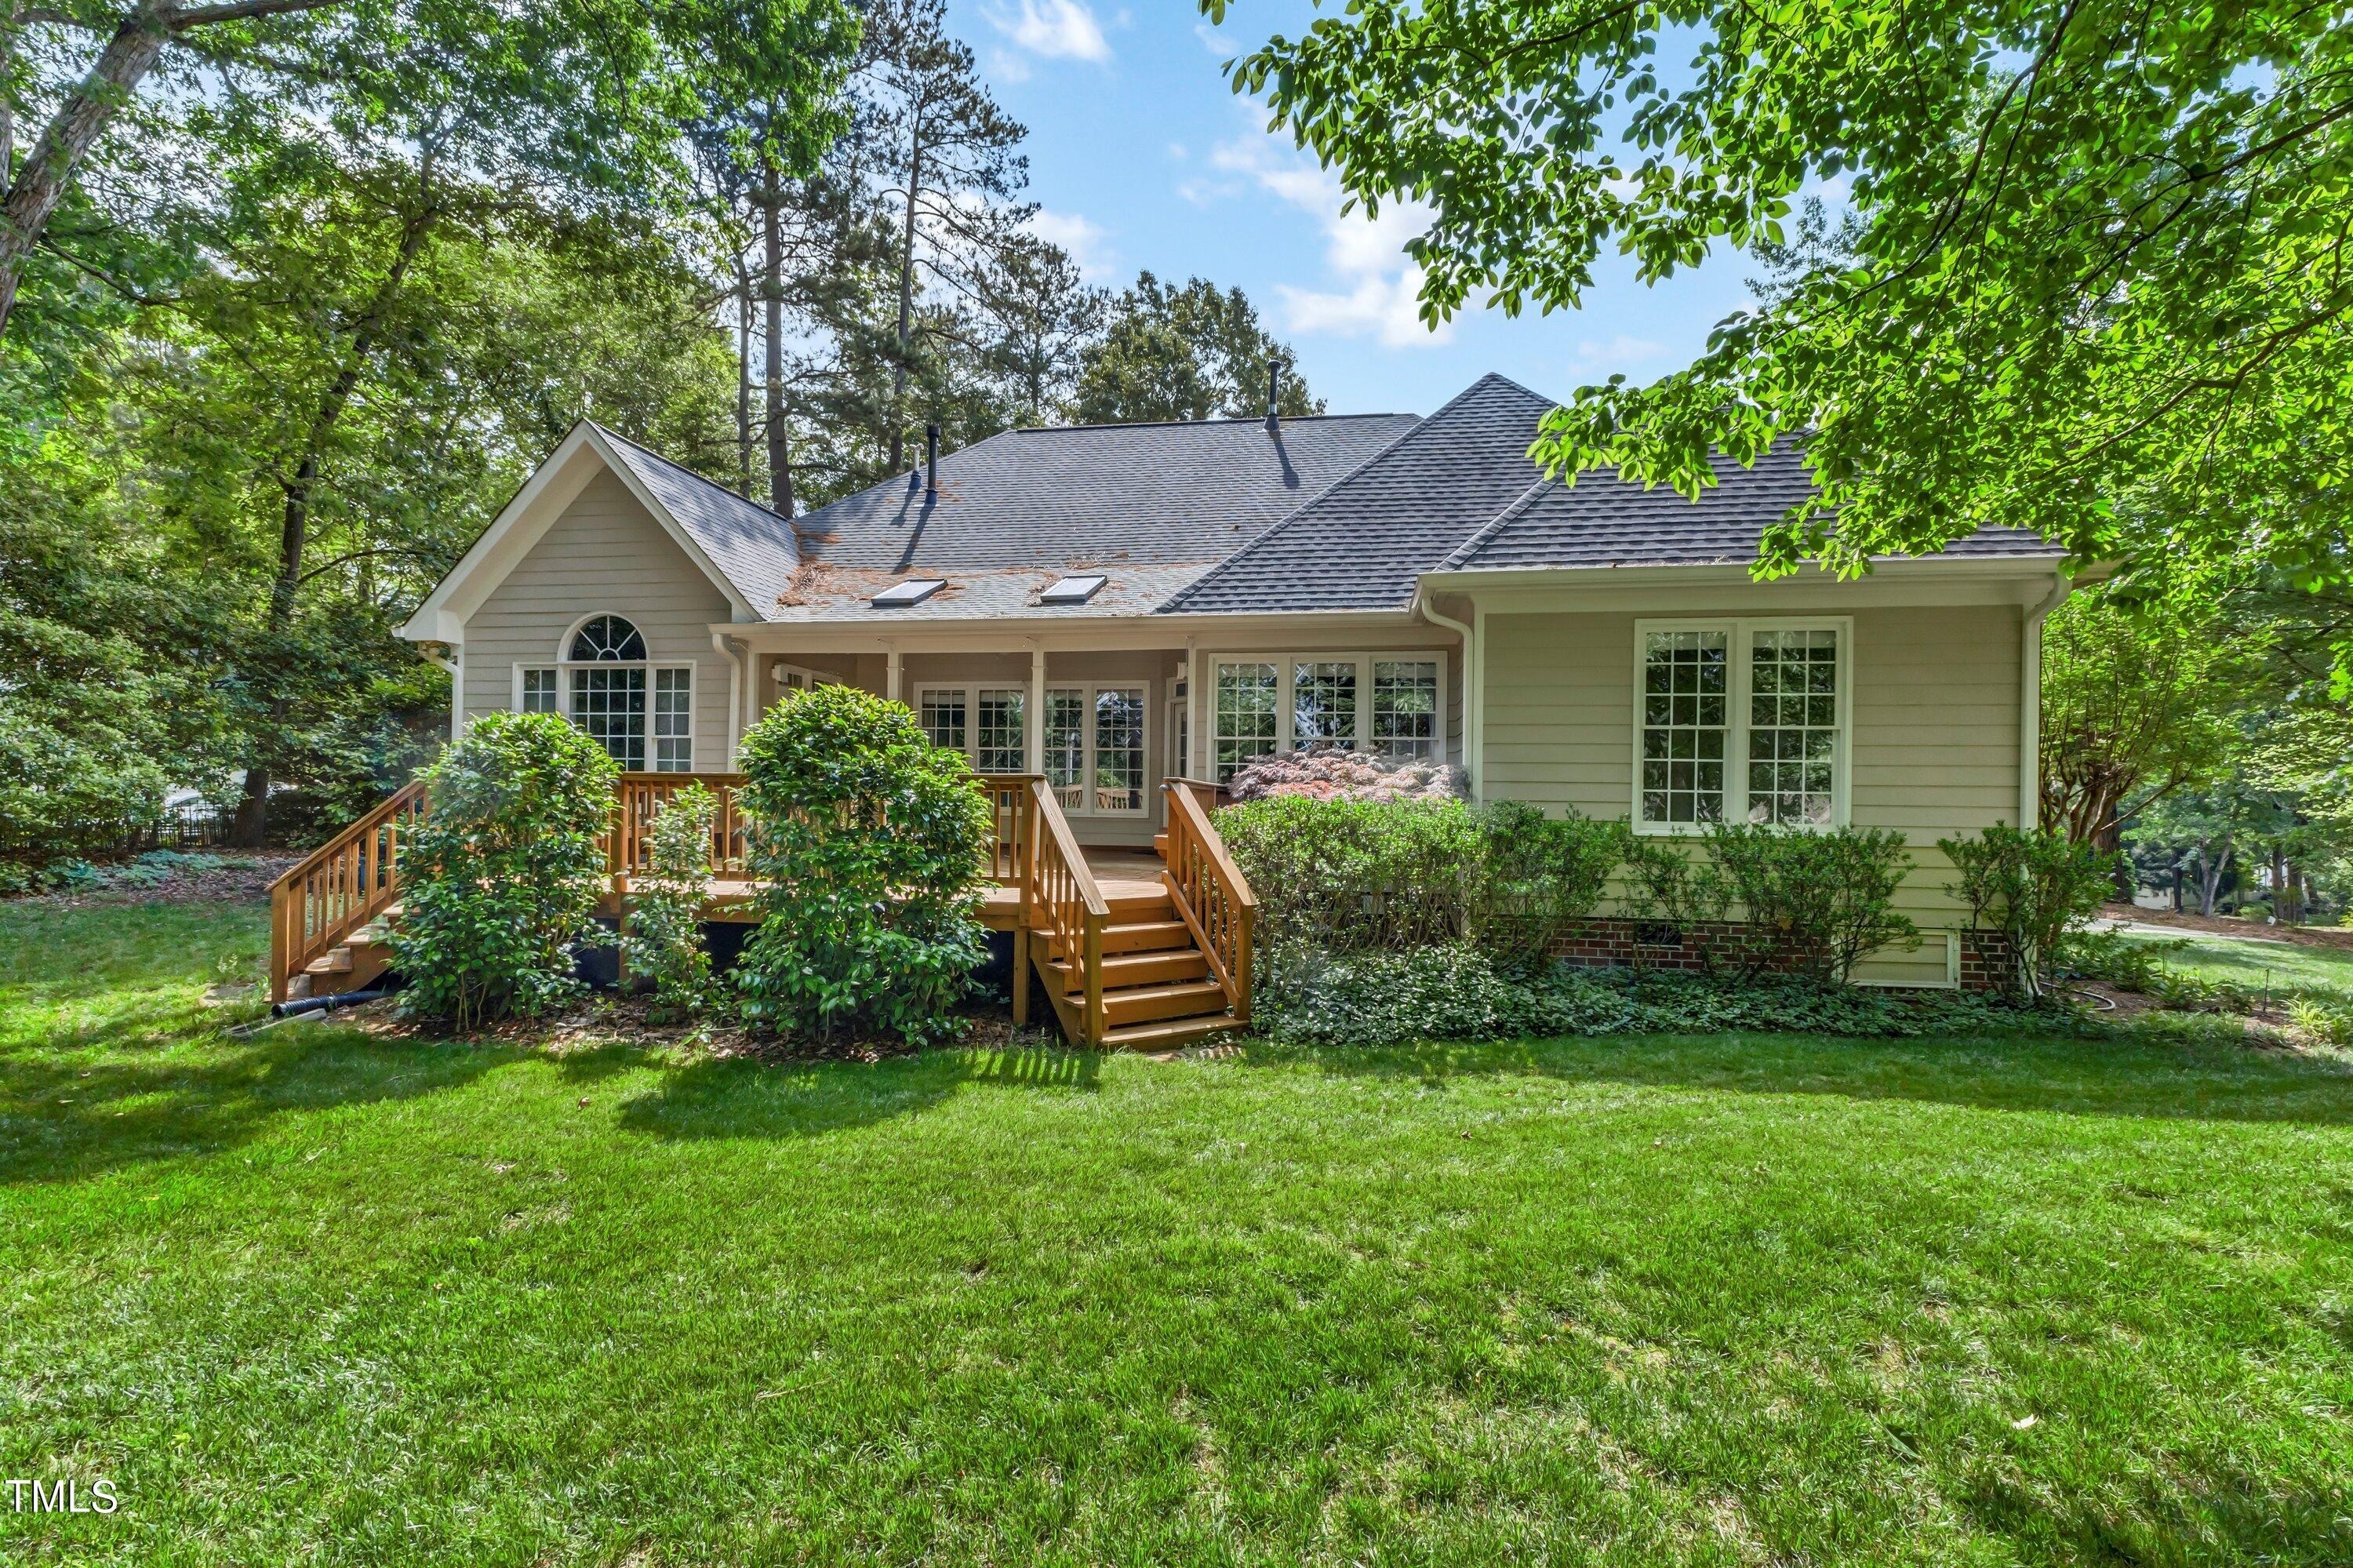 47. 5000 Sunset Forest Circle